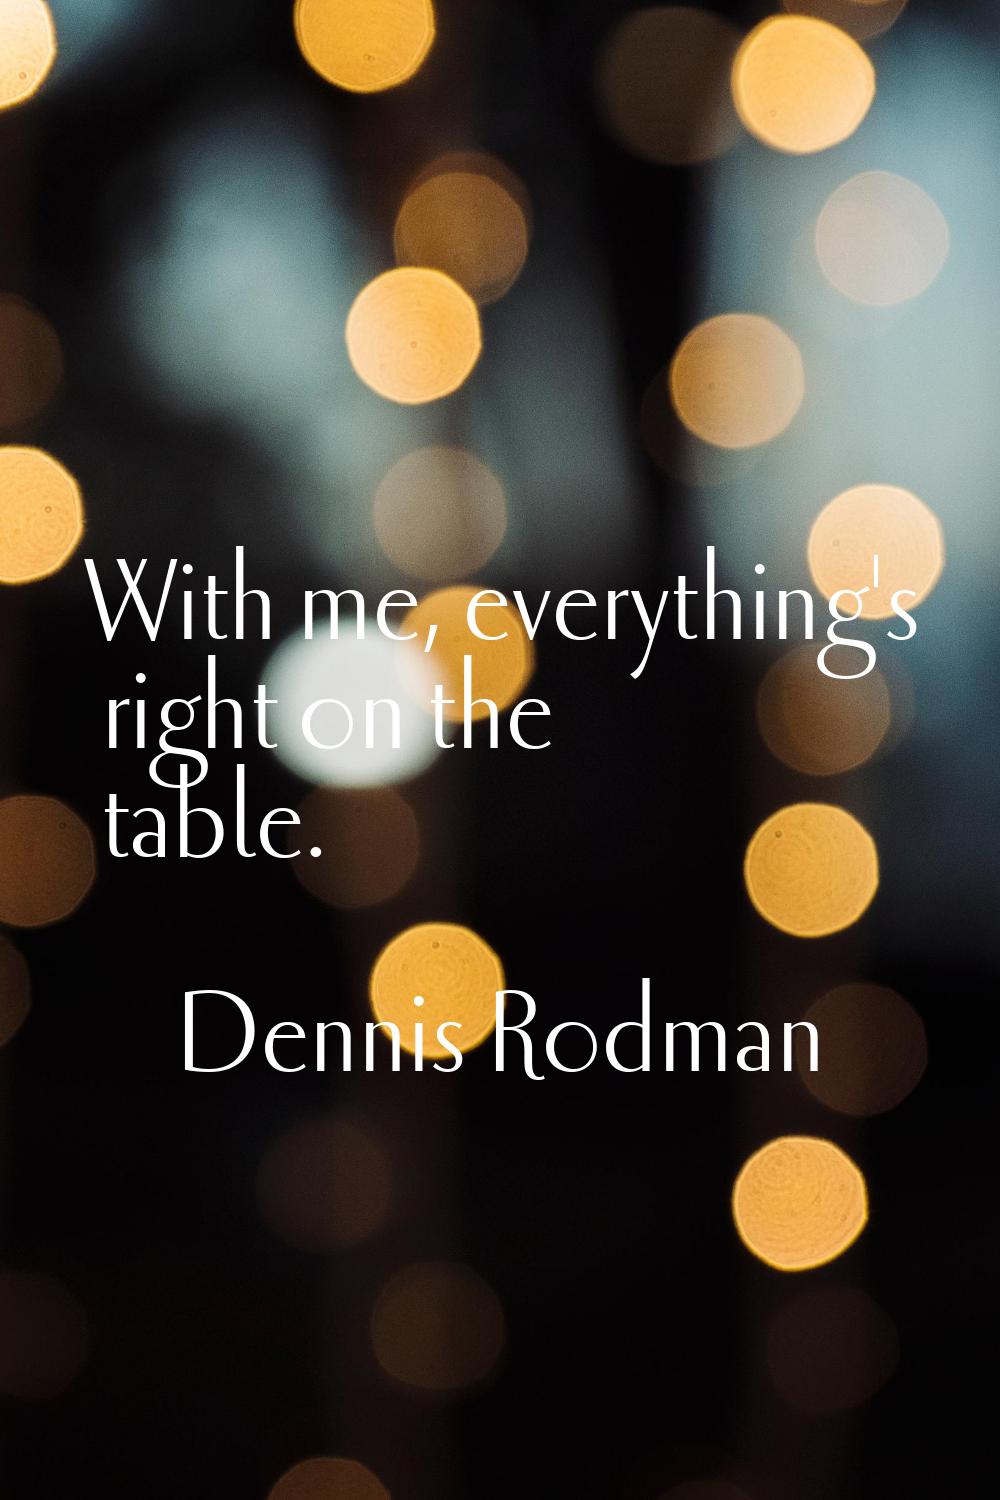 With me, everything's right on the table.